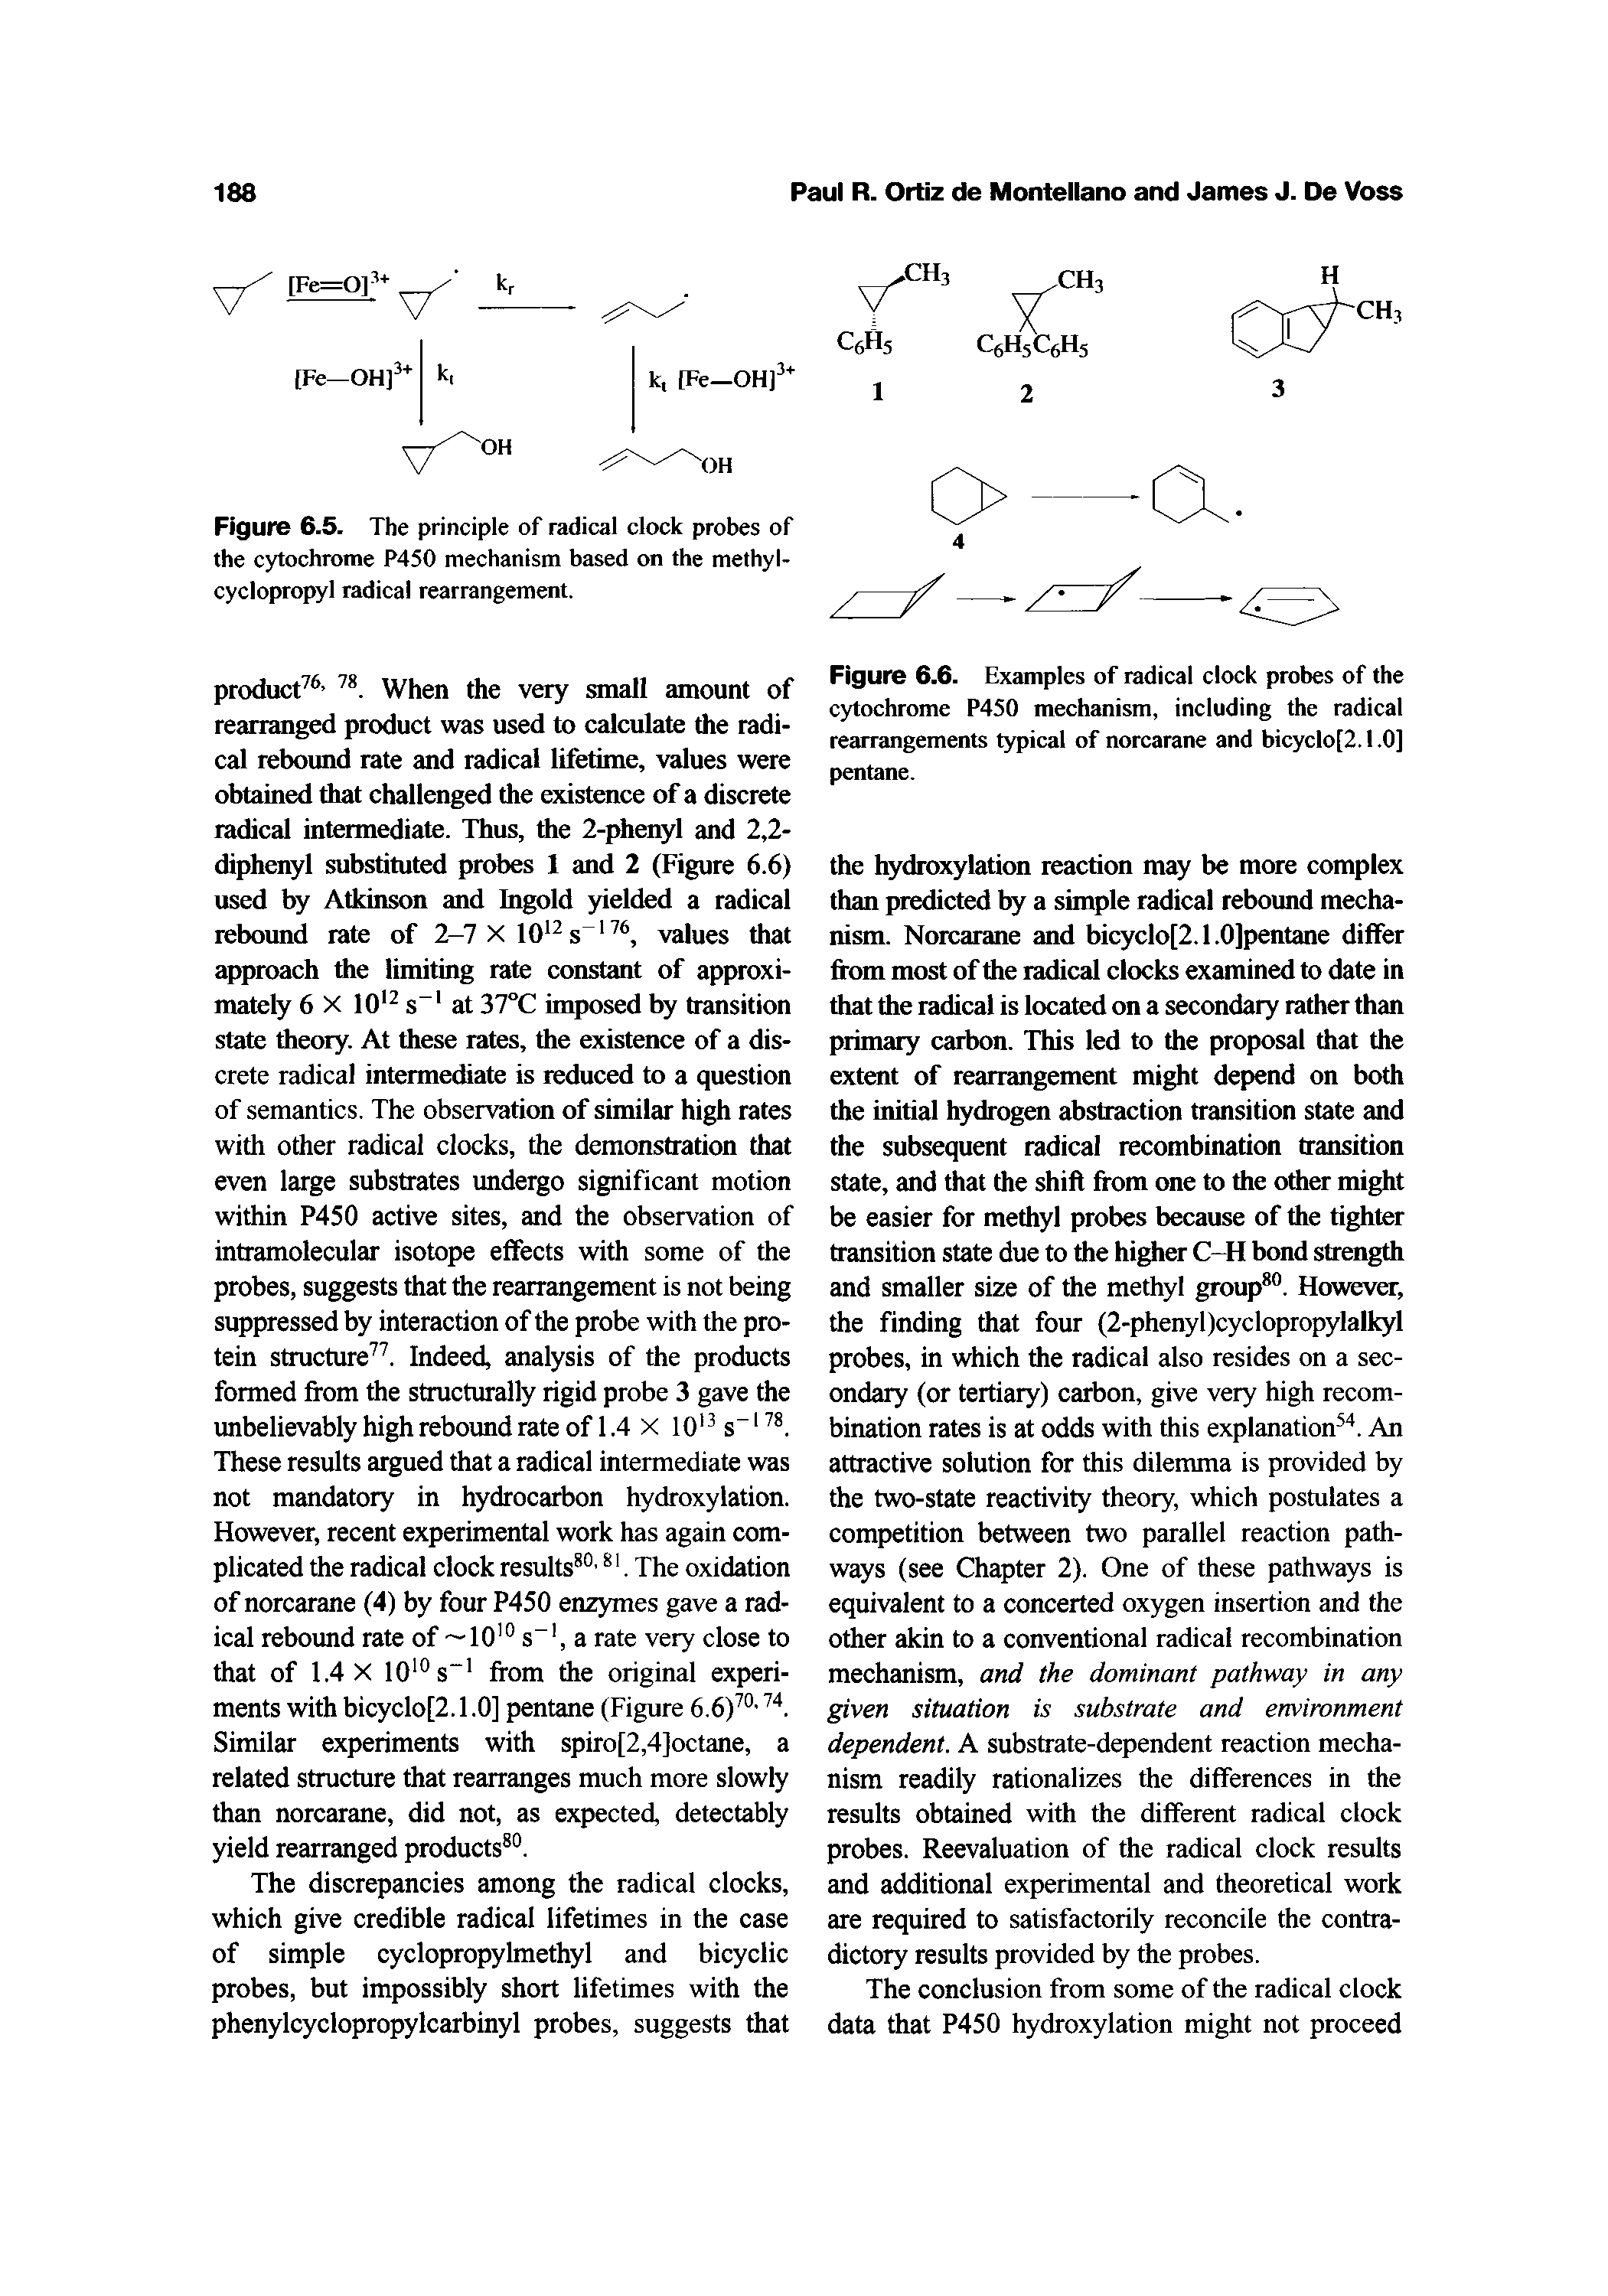 Figure 6.5. The principle of radical clock probes of the cytochrome P450 mechanism based on the methyl-cyclopropyl radical rearrangement.